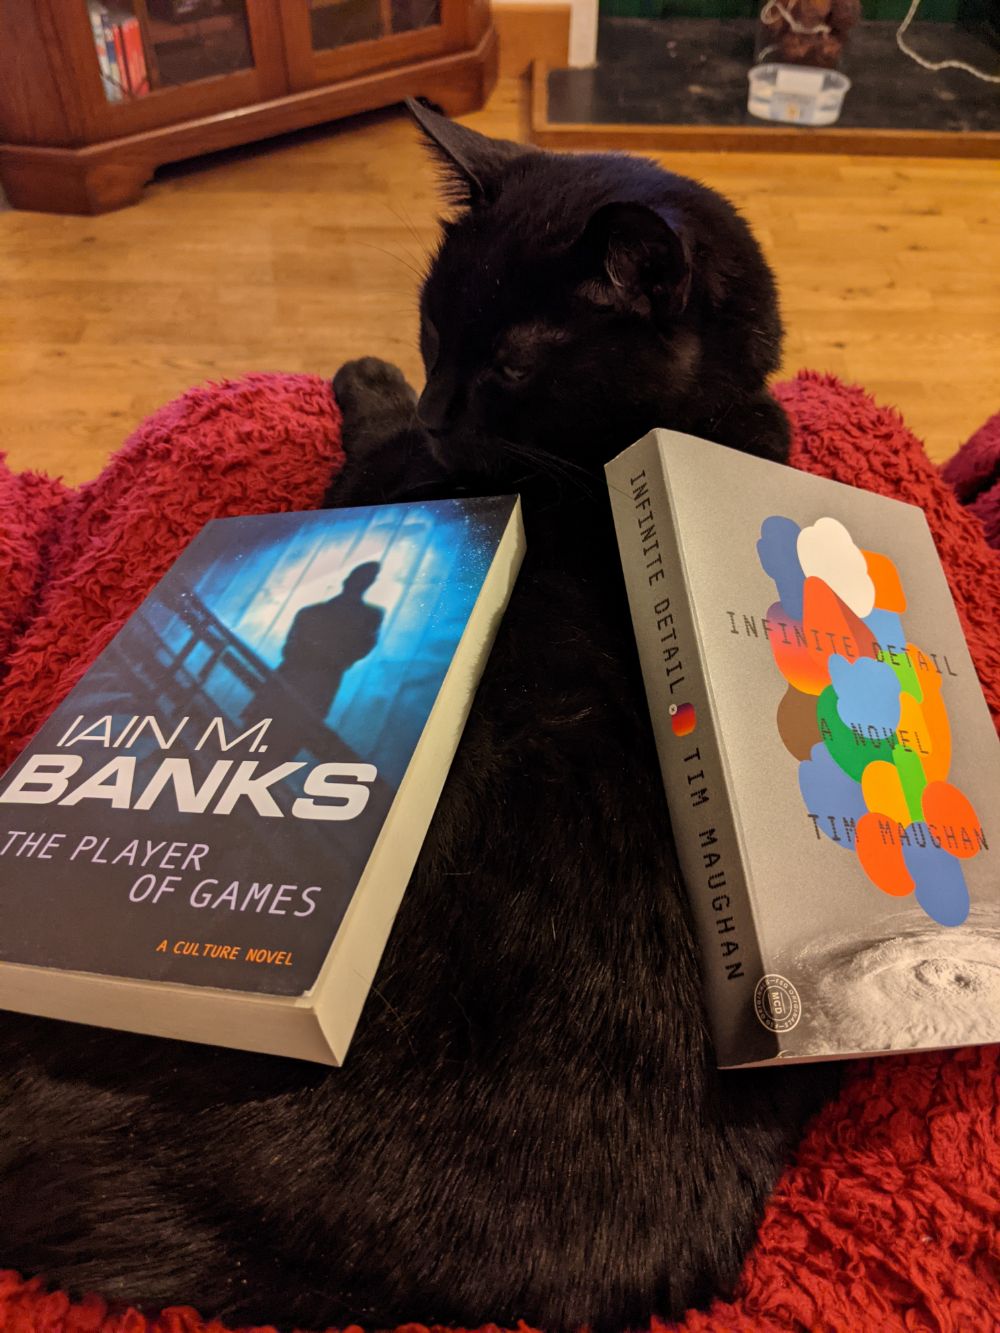 A black cat lying on a red blanket, looking unimpressed as two books - "The Player of Games" by Iain M Banks, and "Infinite Detail: A Novel" by Tim Maughan - lie on his back